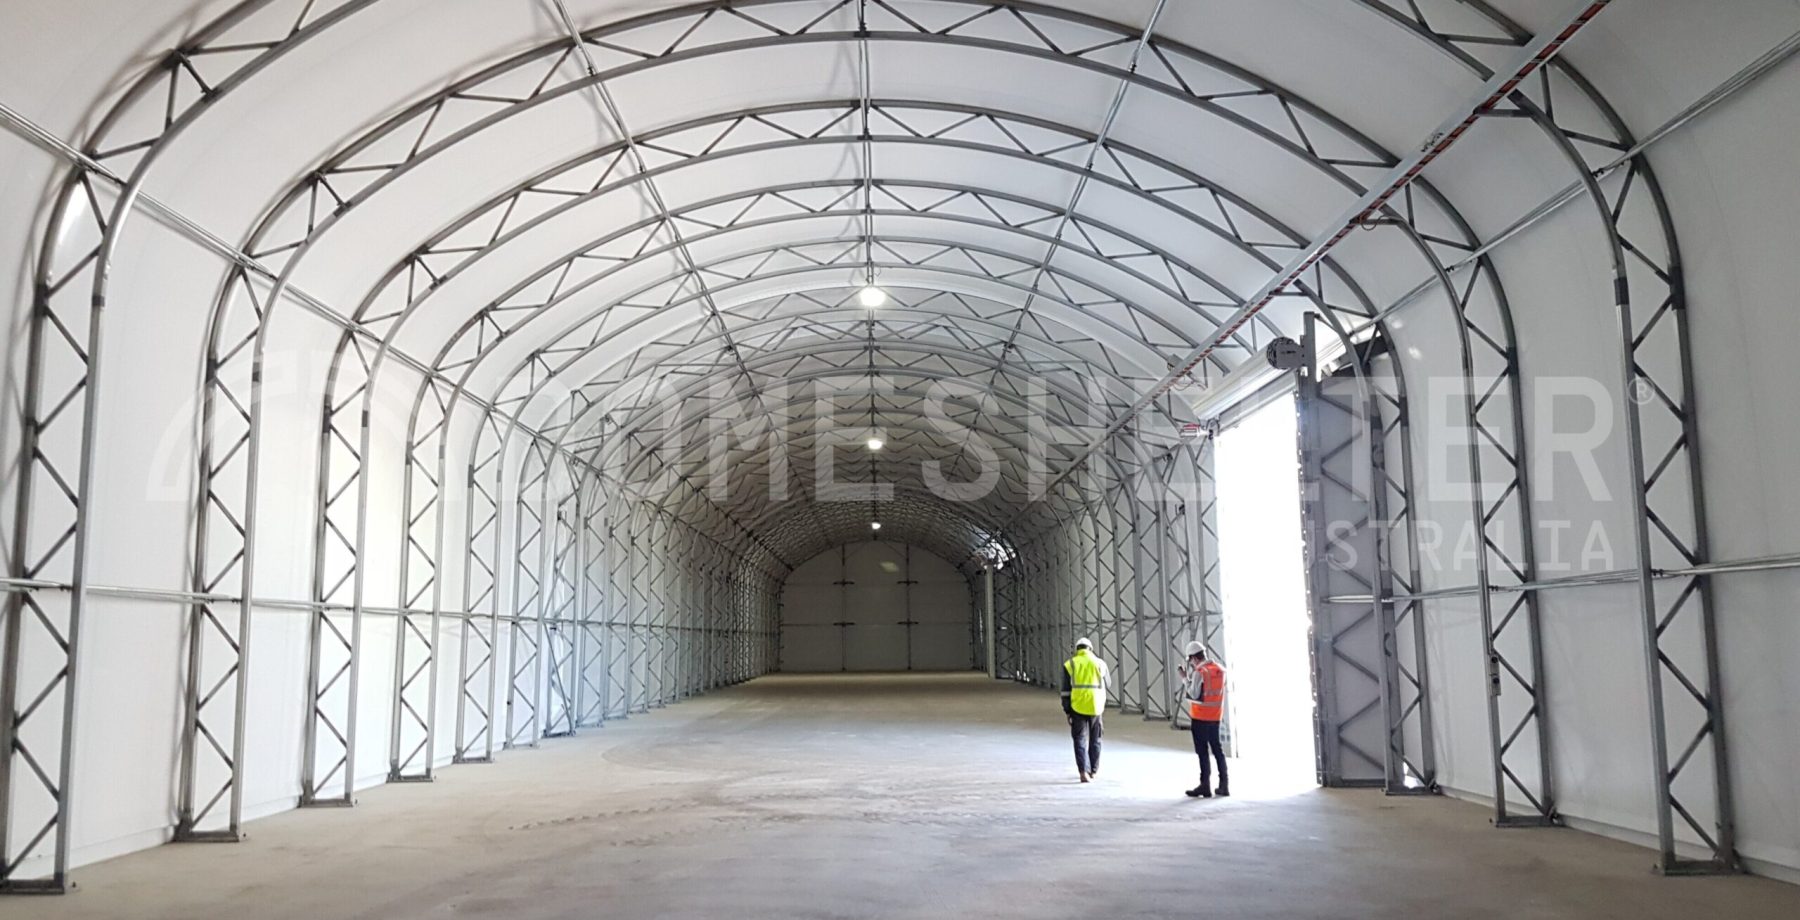 large truss fabric warehouse building